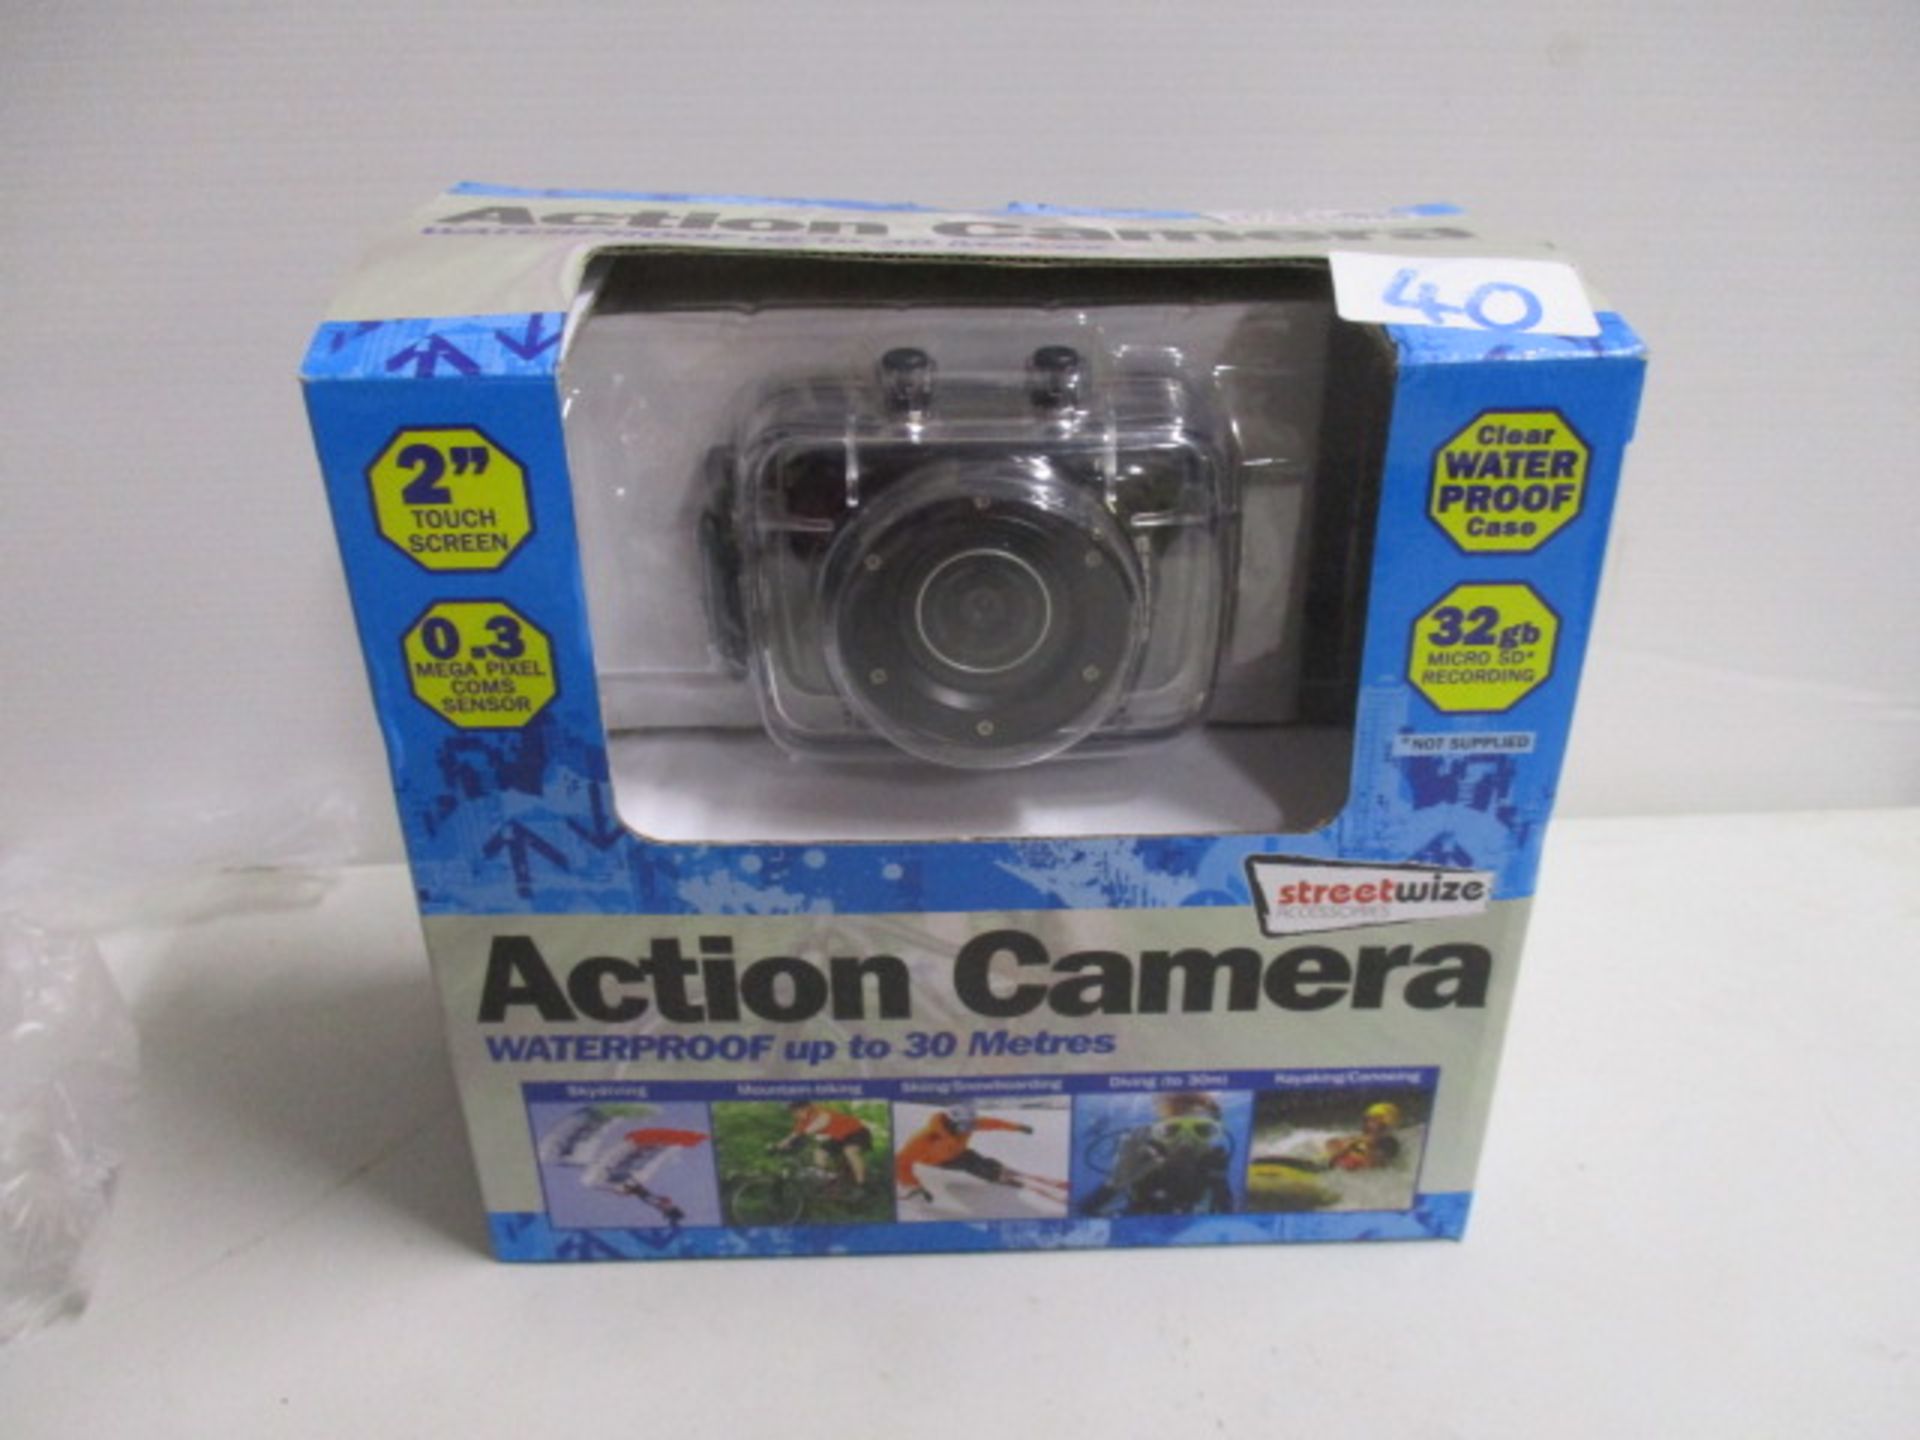 Streetwize waterproof Action Camera upto 30 metres boxed and complete with accessories looks unused